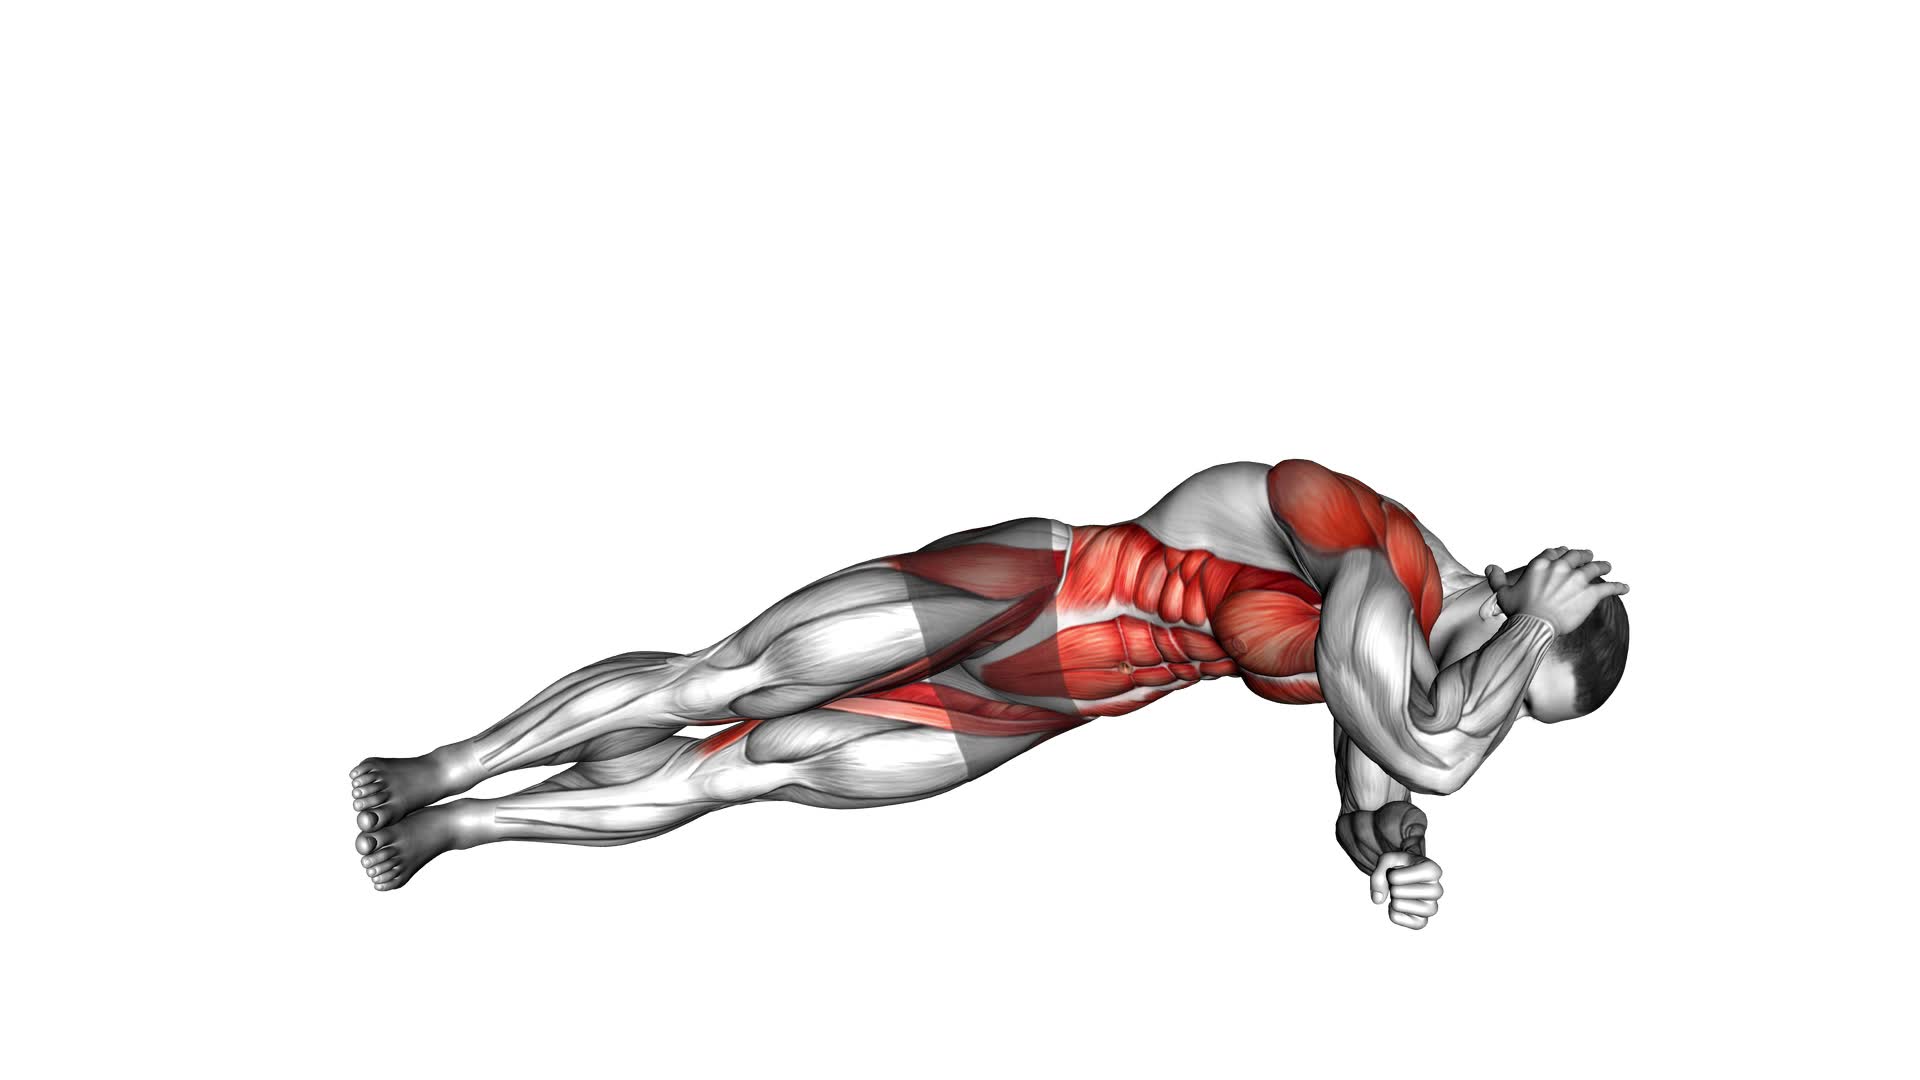 Side Plank Raise and Crunch (male) - Video Exercise Guide & Tips